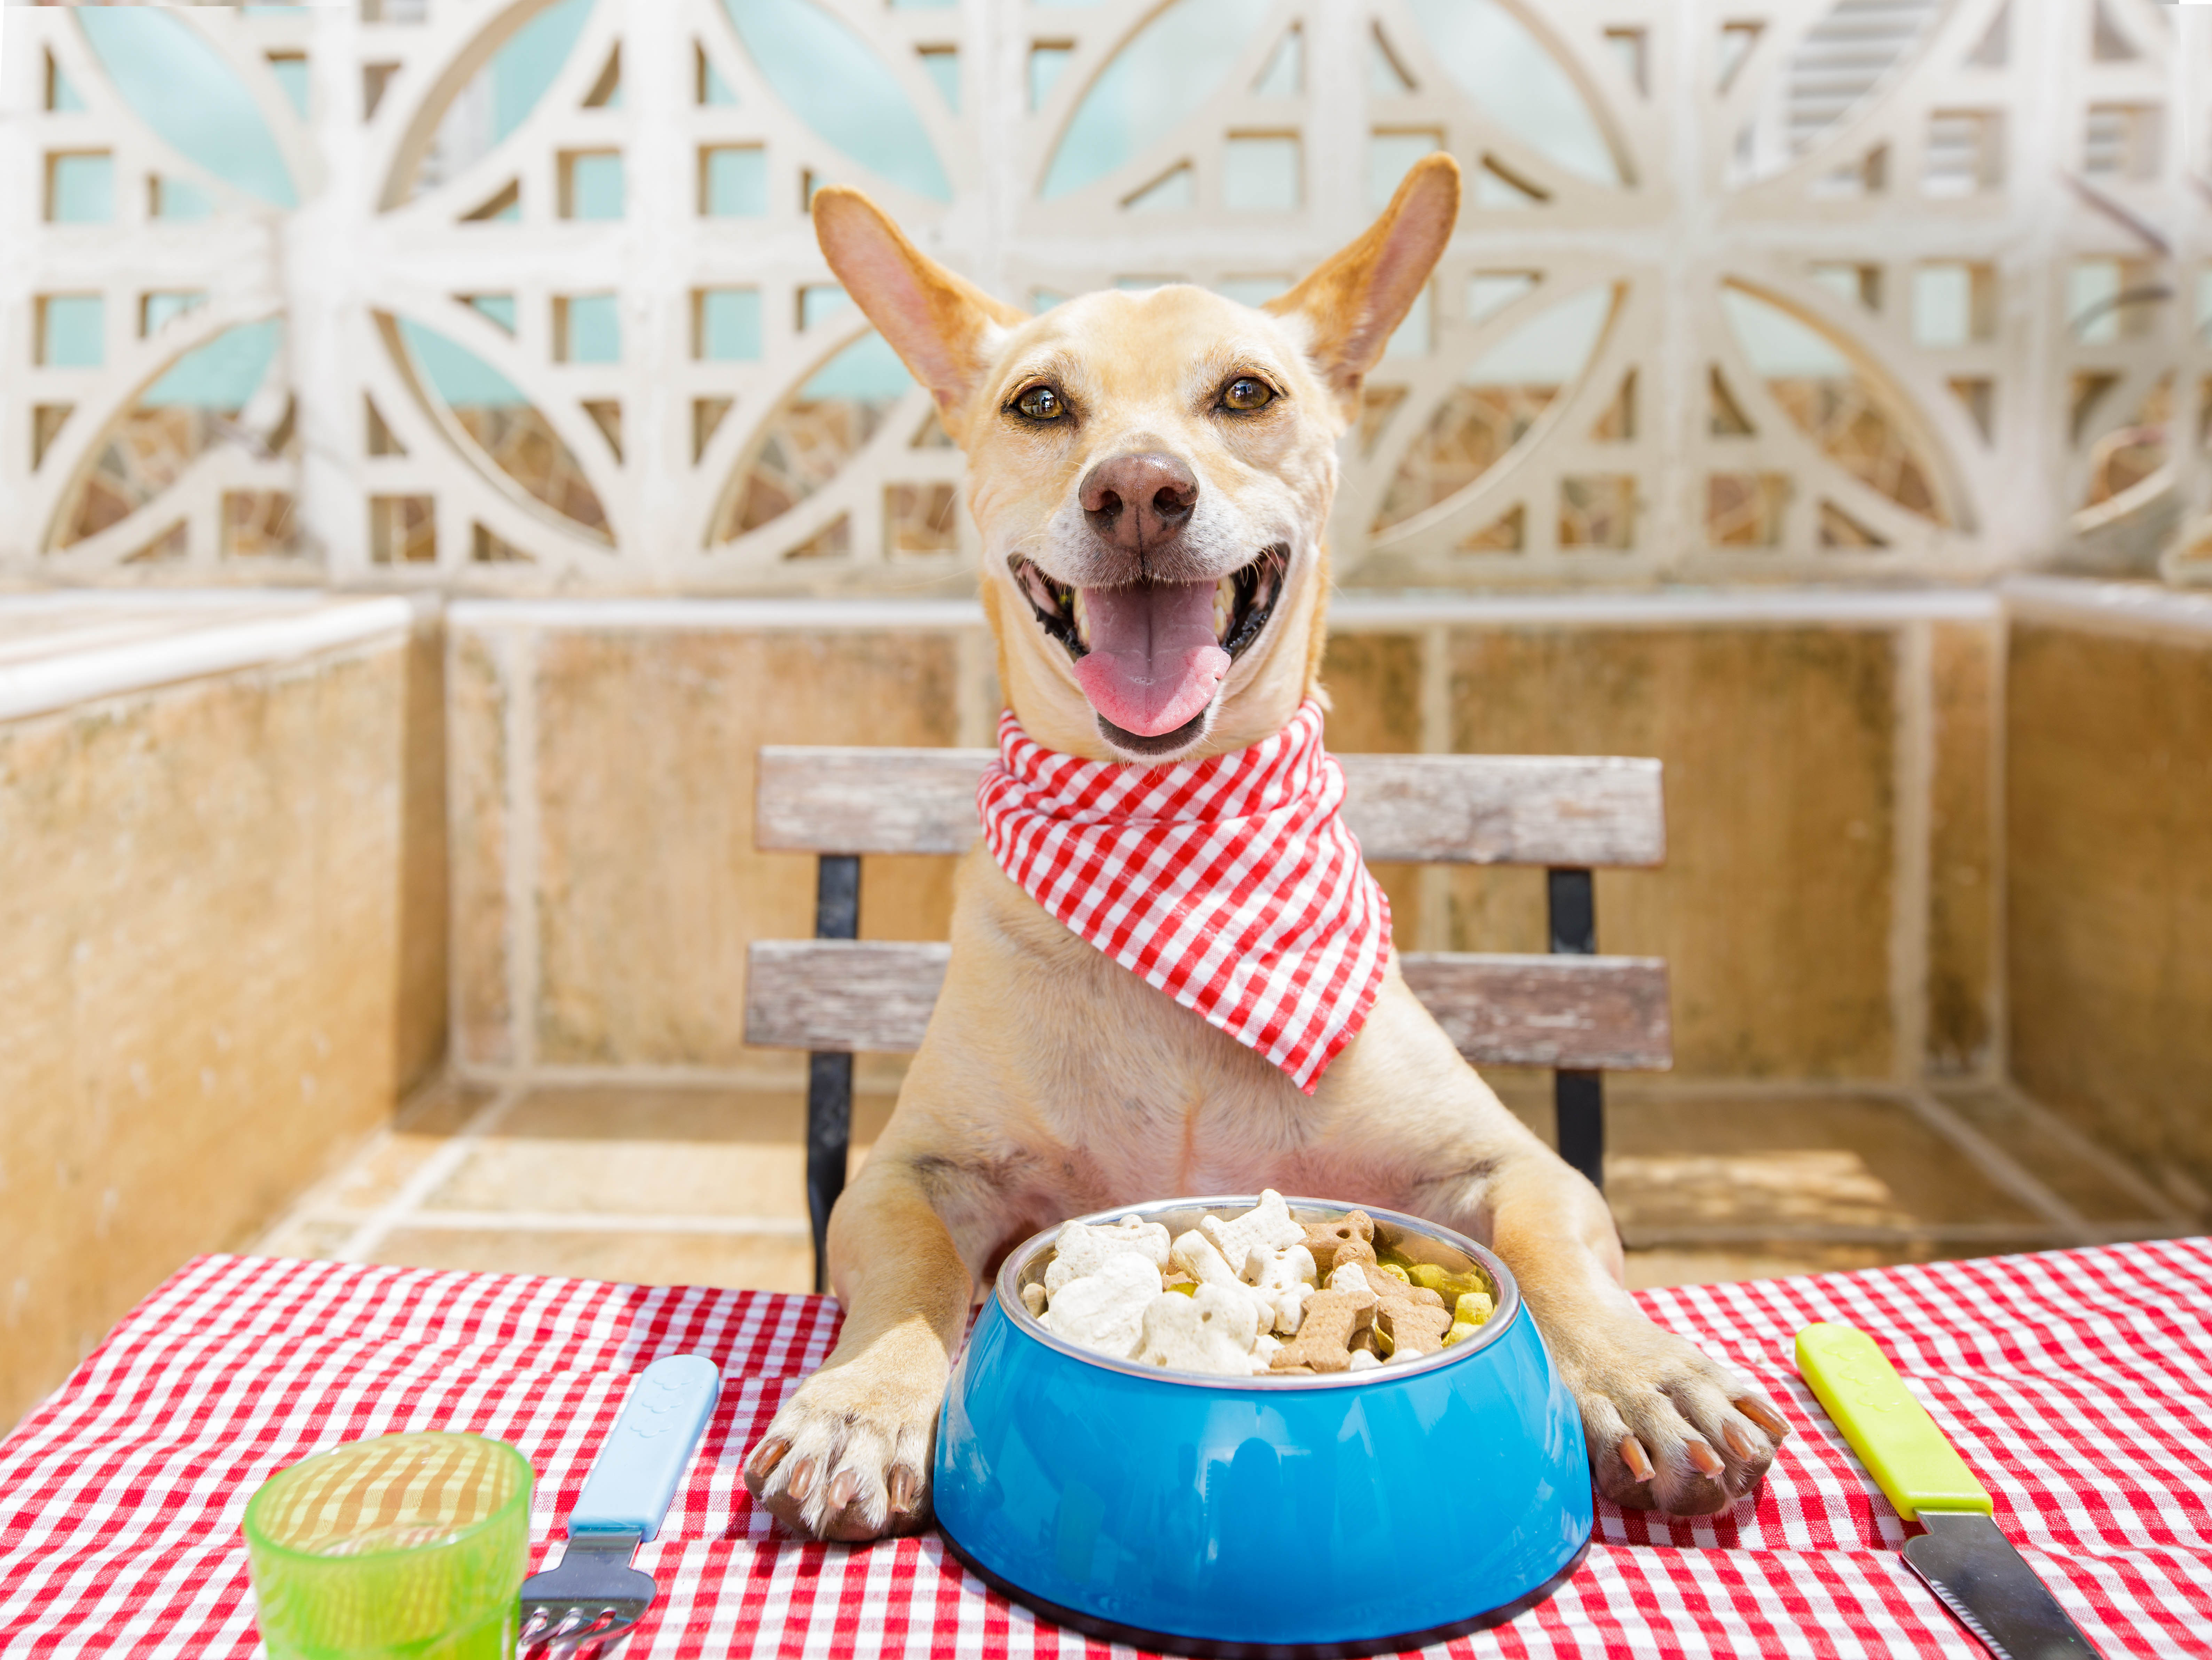 Feeding Frenzy: How Accurate Are Your Pet Food's Feeding